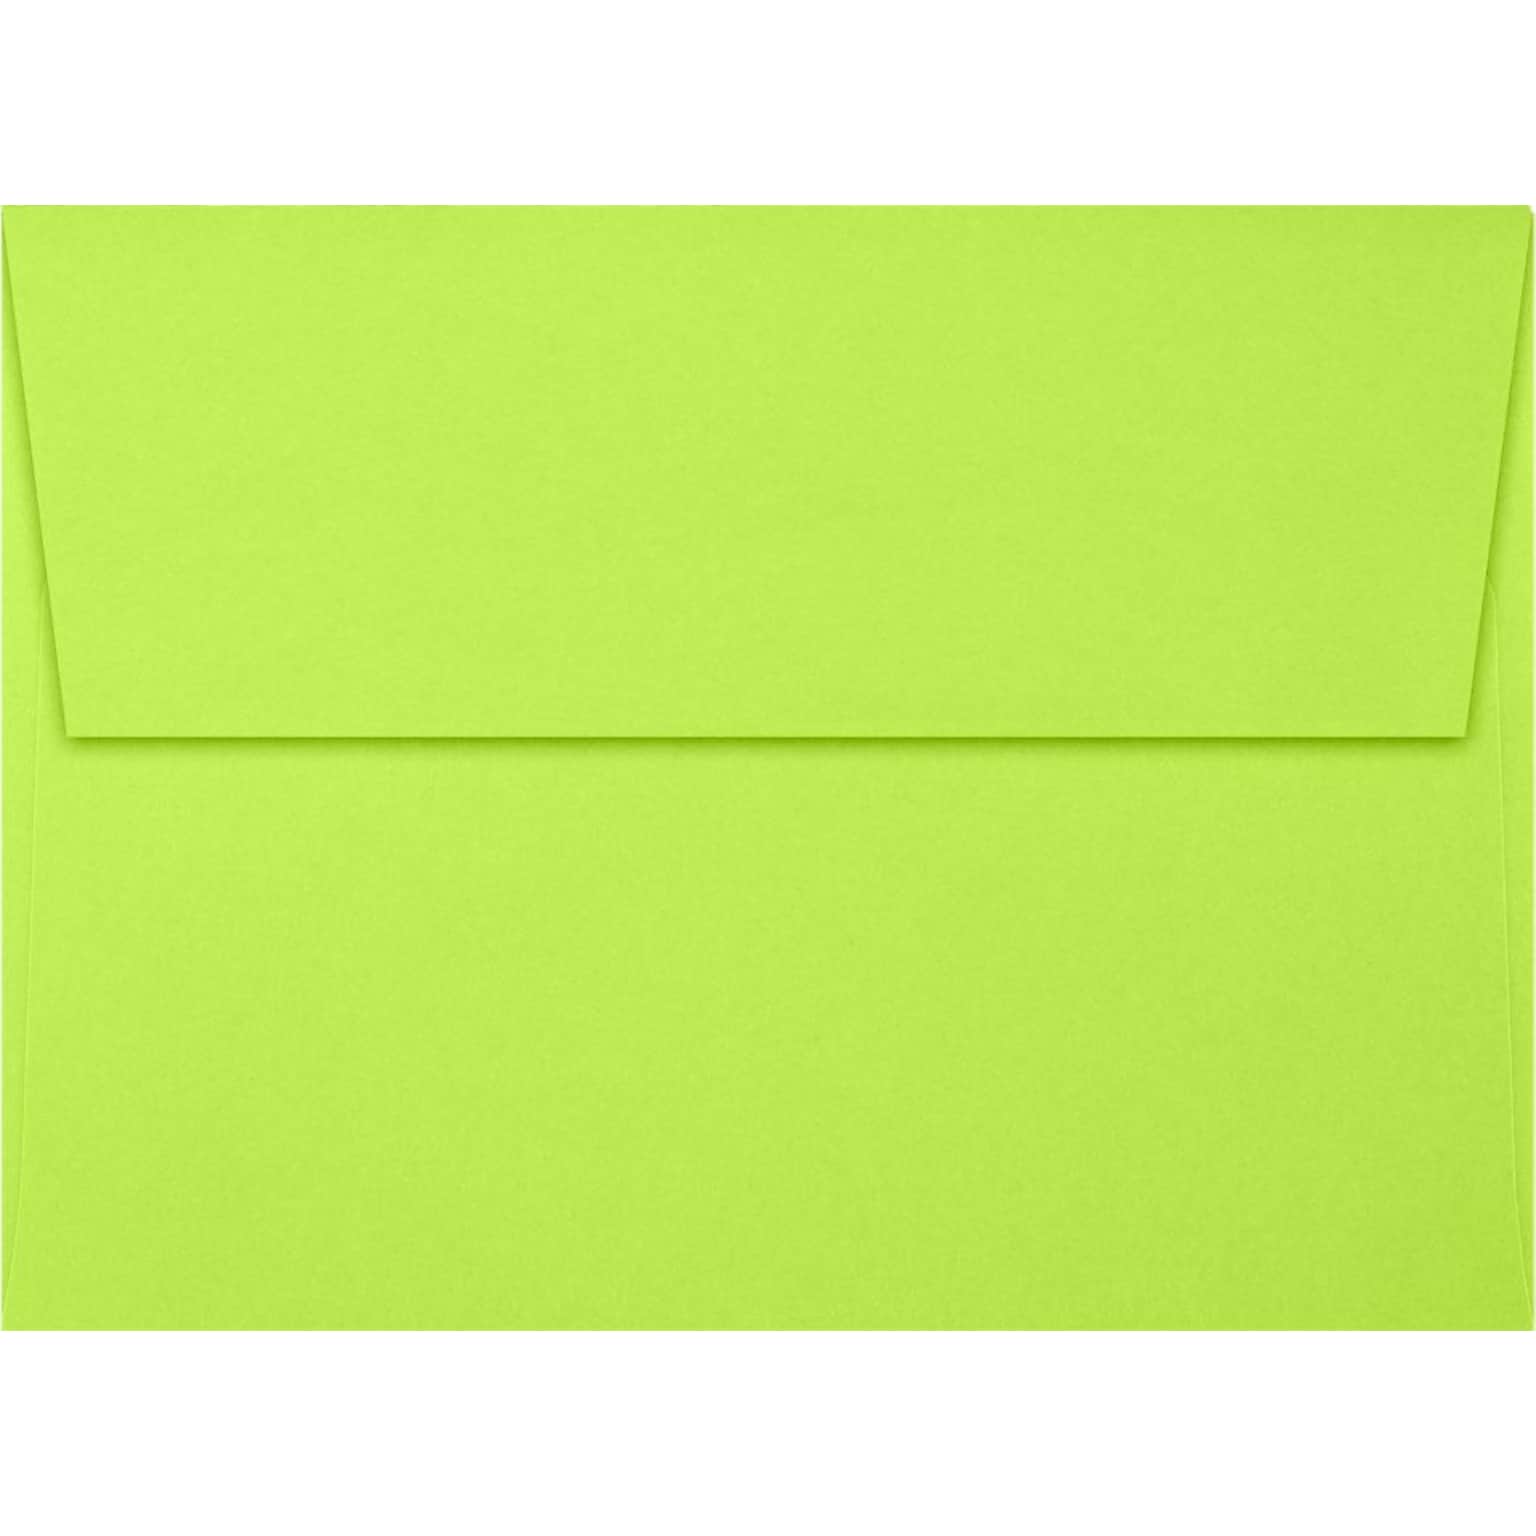 LUX A7 Invitation Envelopes (5 1/4 x 7 1/4) 50/Pack, Electric Green (4880-ULIM-50)